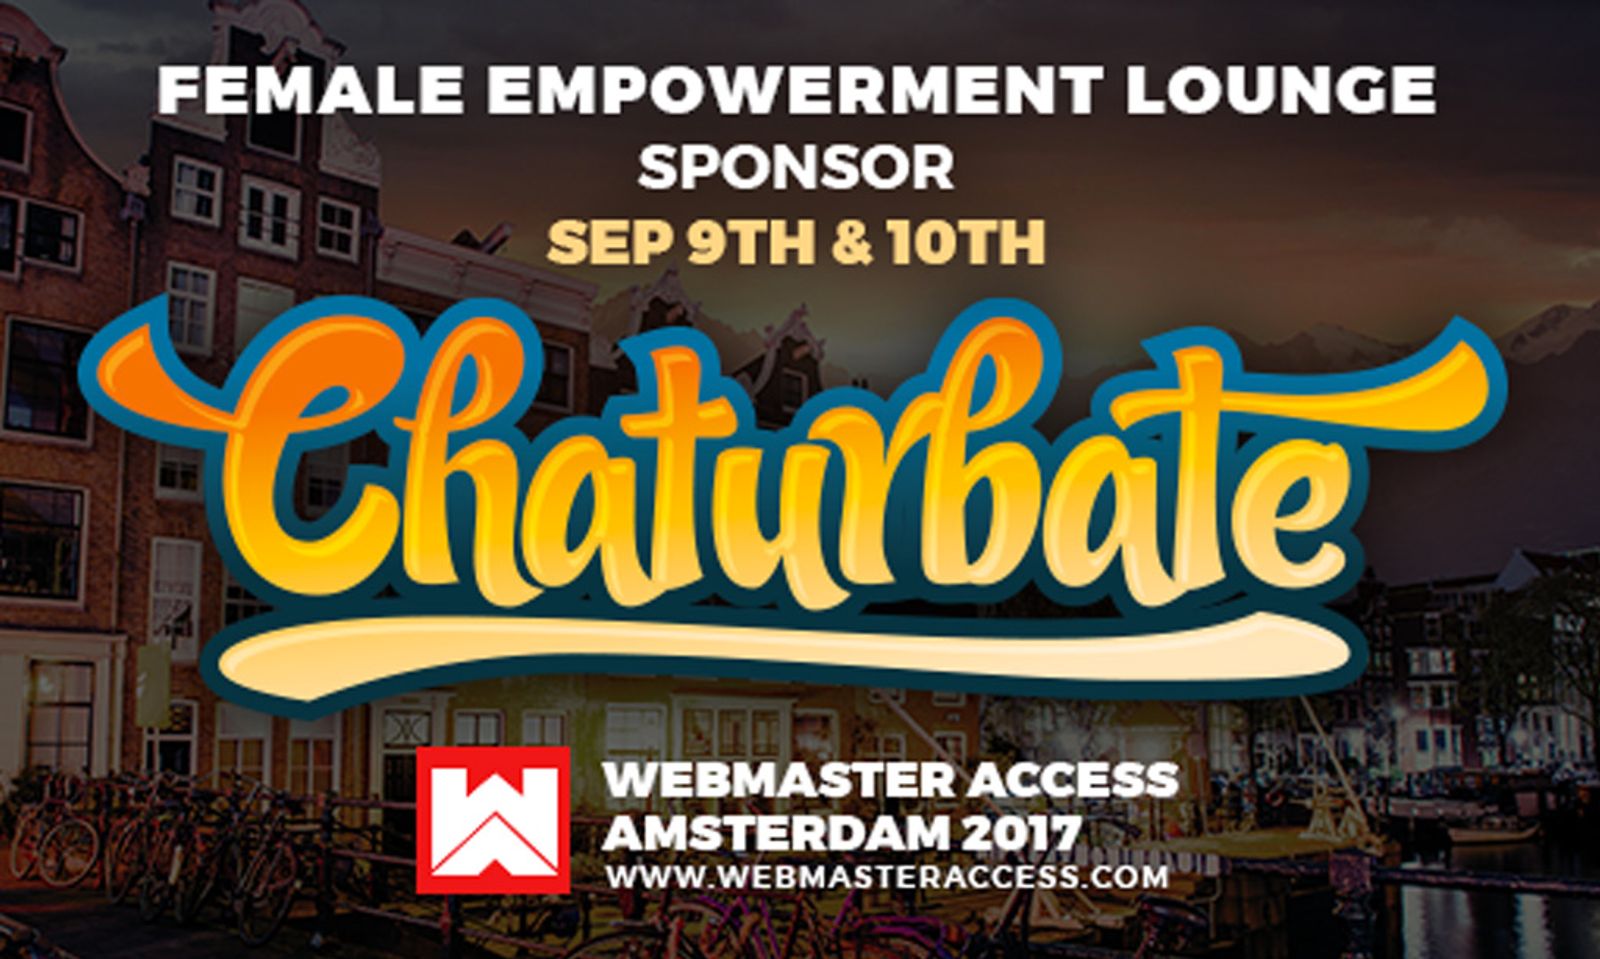 Chaturbate to Sponsor Female Empowerment Lounge for Webmaster Access 2017